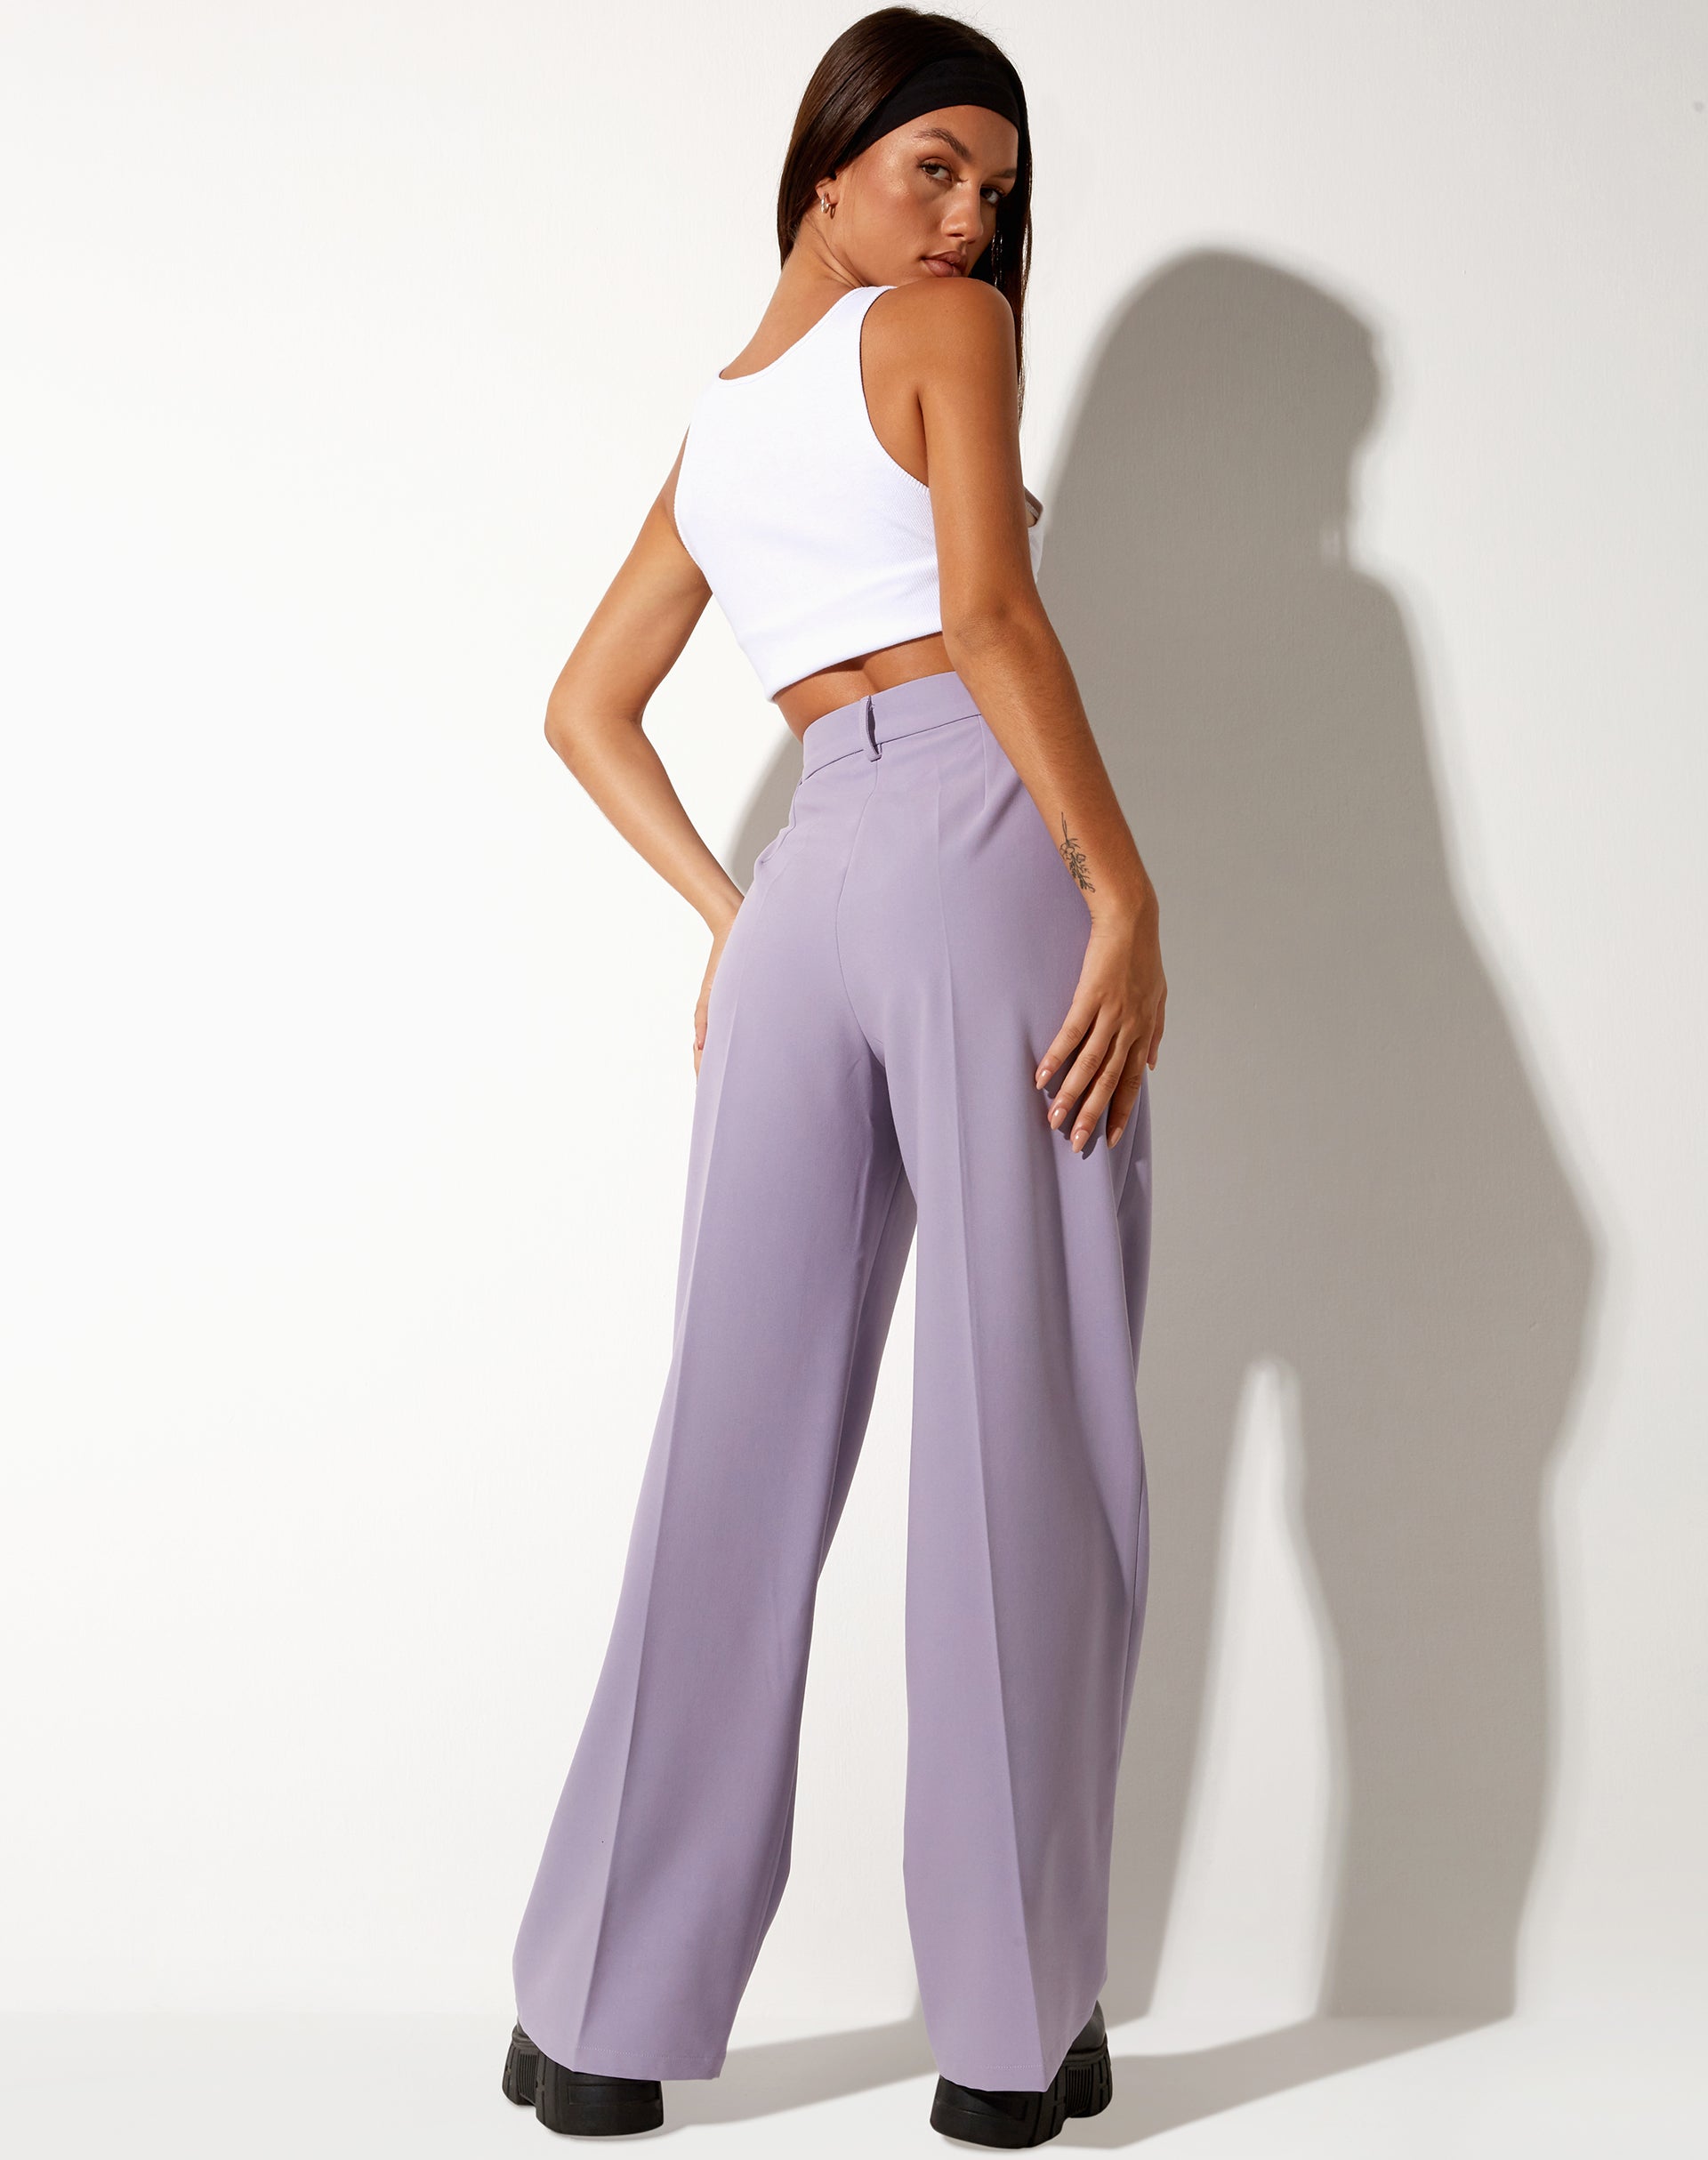 Image of Abba Straight Leg Trouser in Tailoring Purple